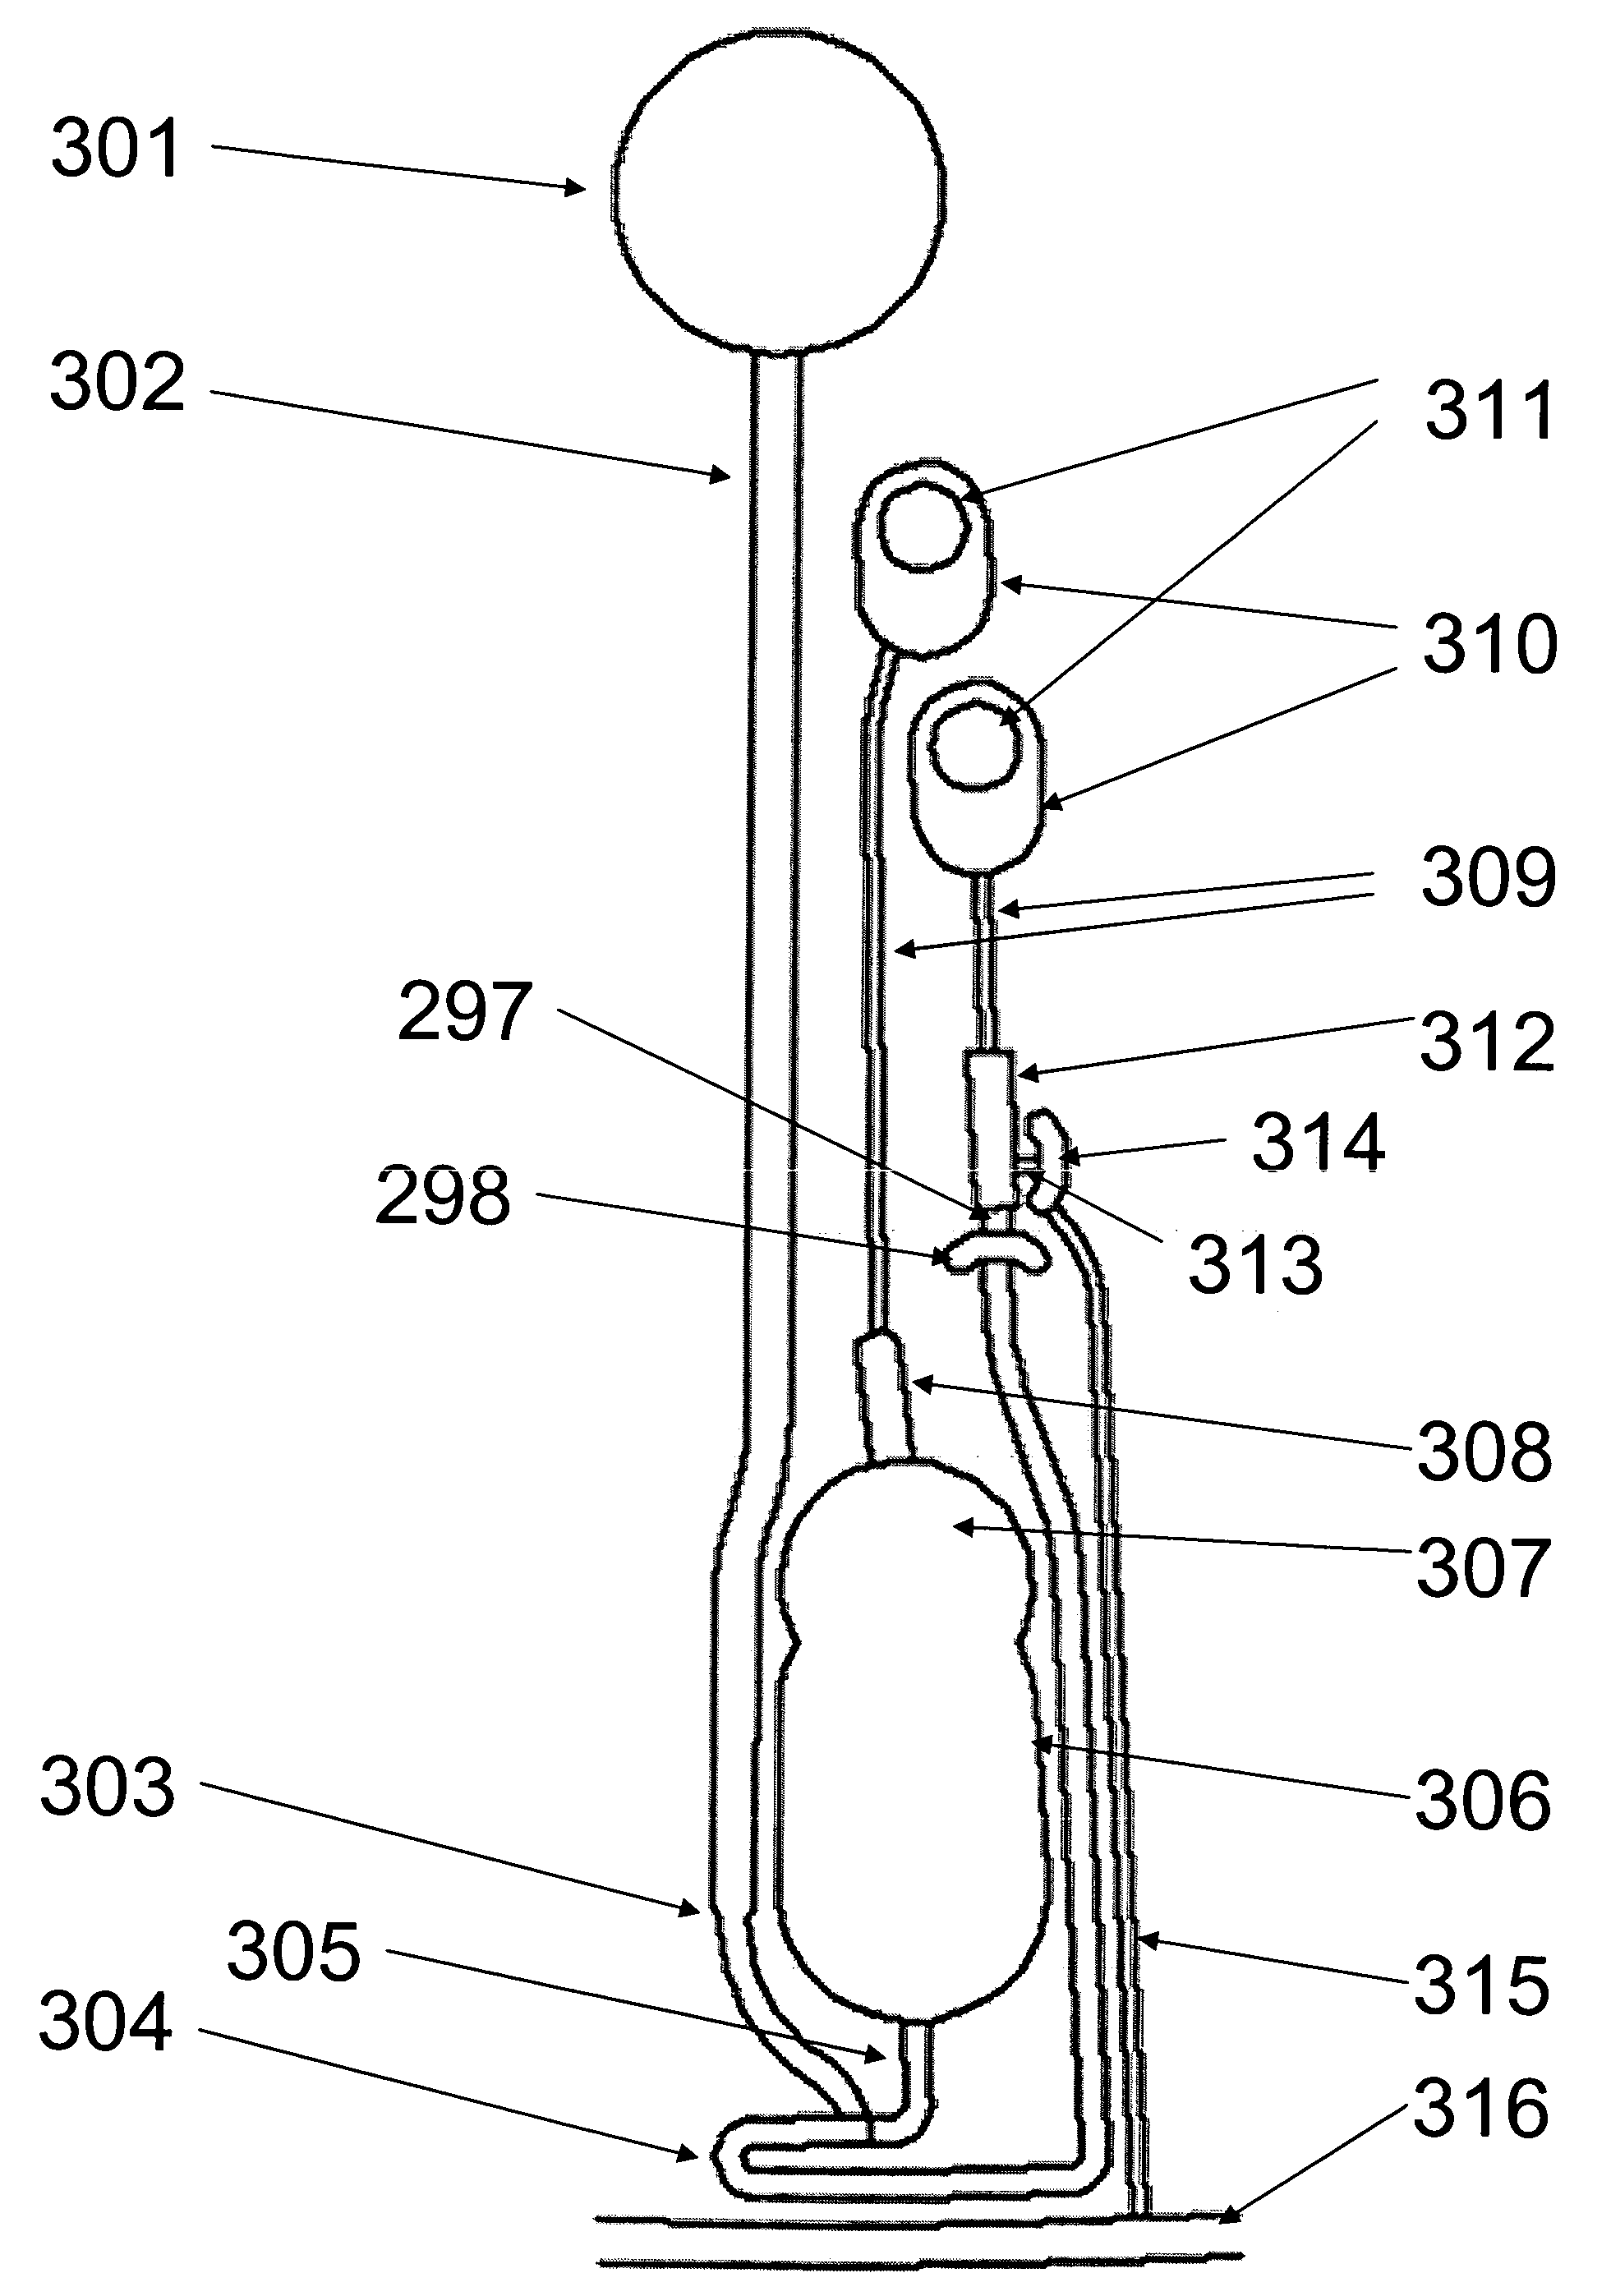 Microfluidics devices and methods for performing based assays